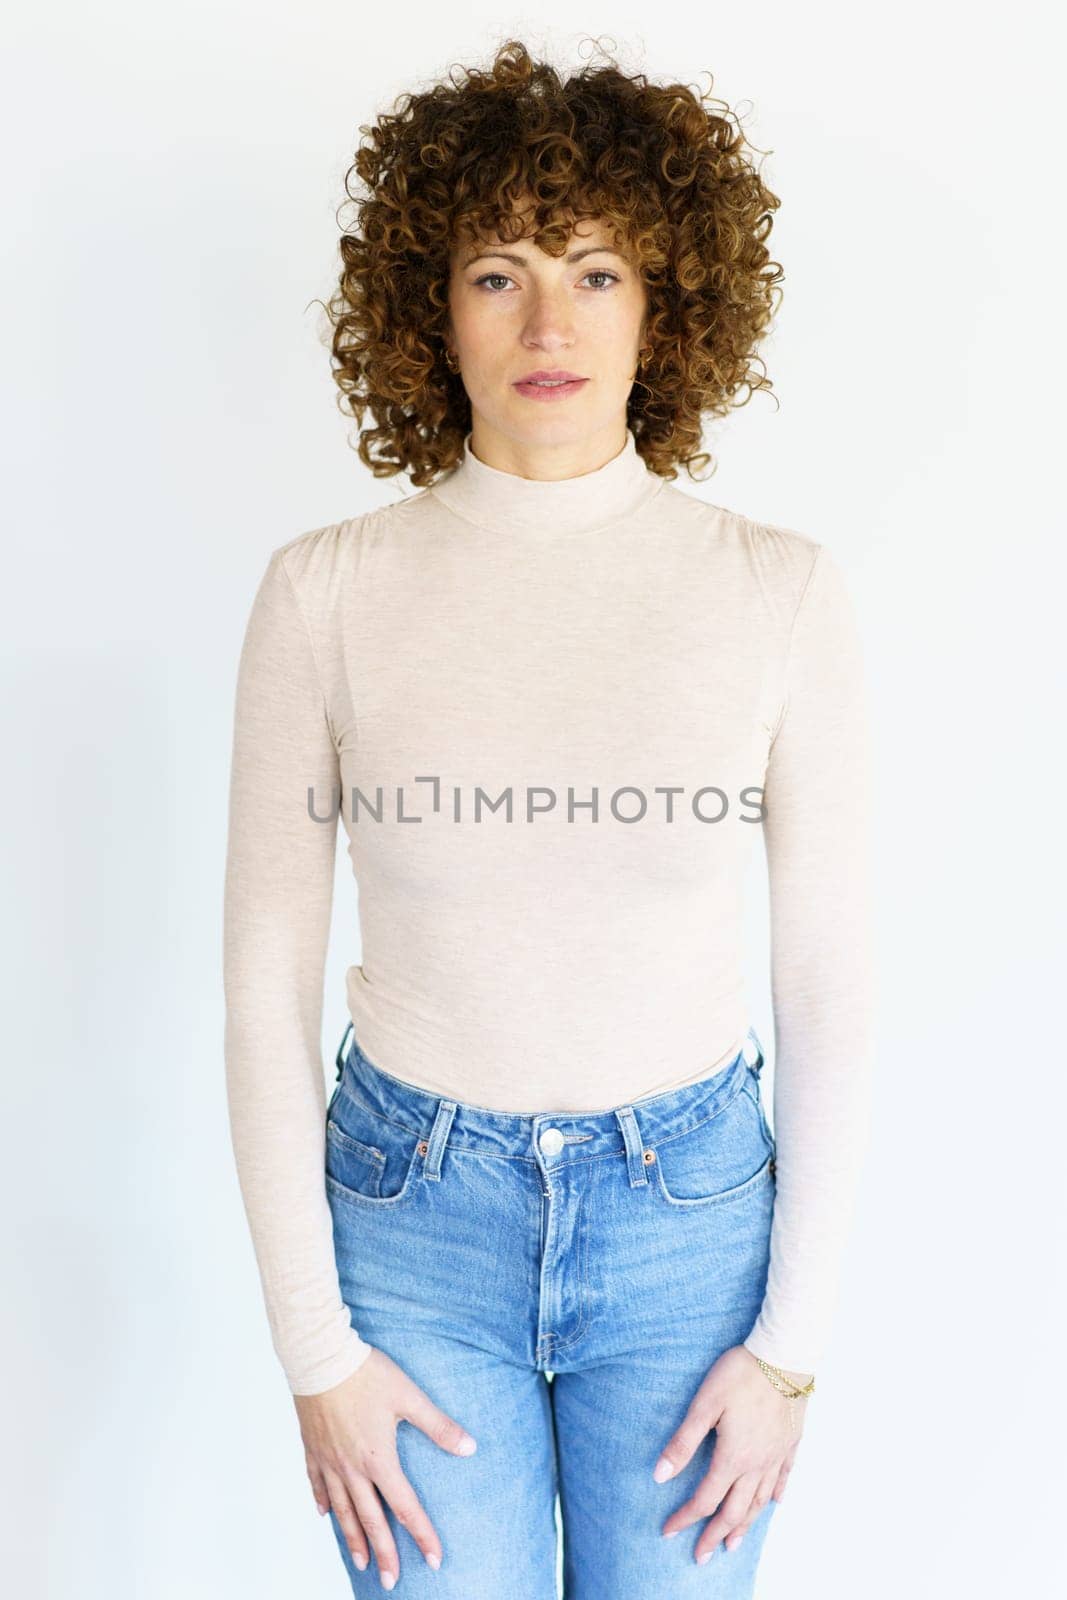 Adult female in beige turtleneck and jeans with brown curly hair looking at camera while standing still with arms hanging straight on sides